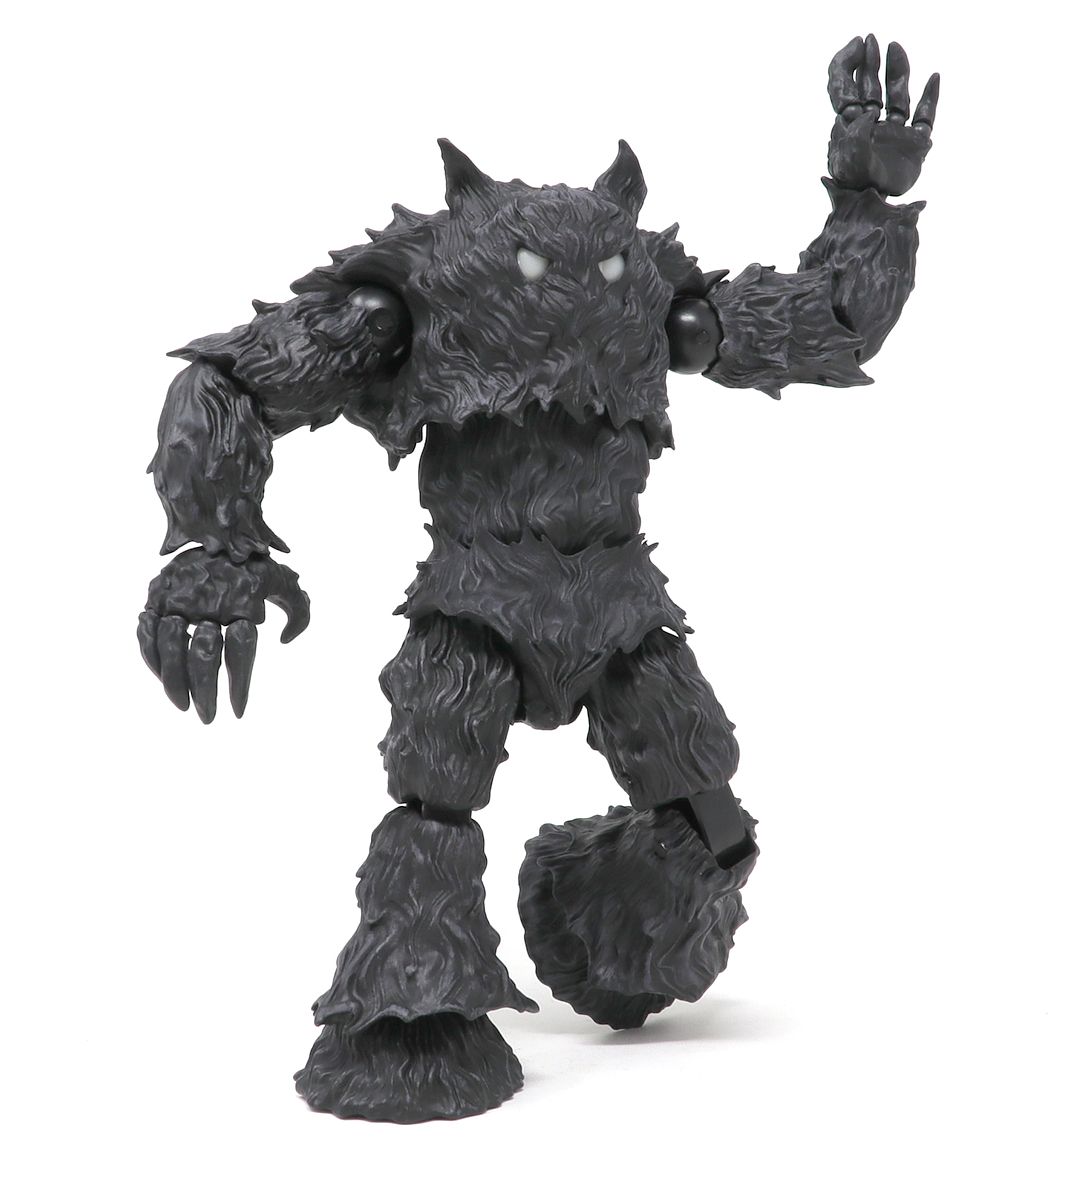 Figma SPACE INVADERS MONSTER